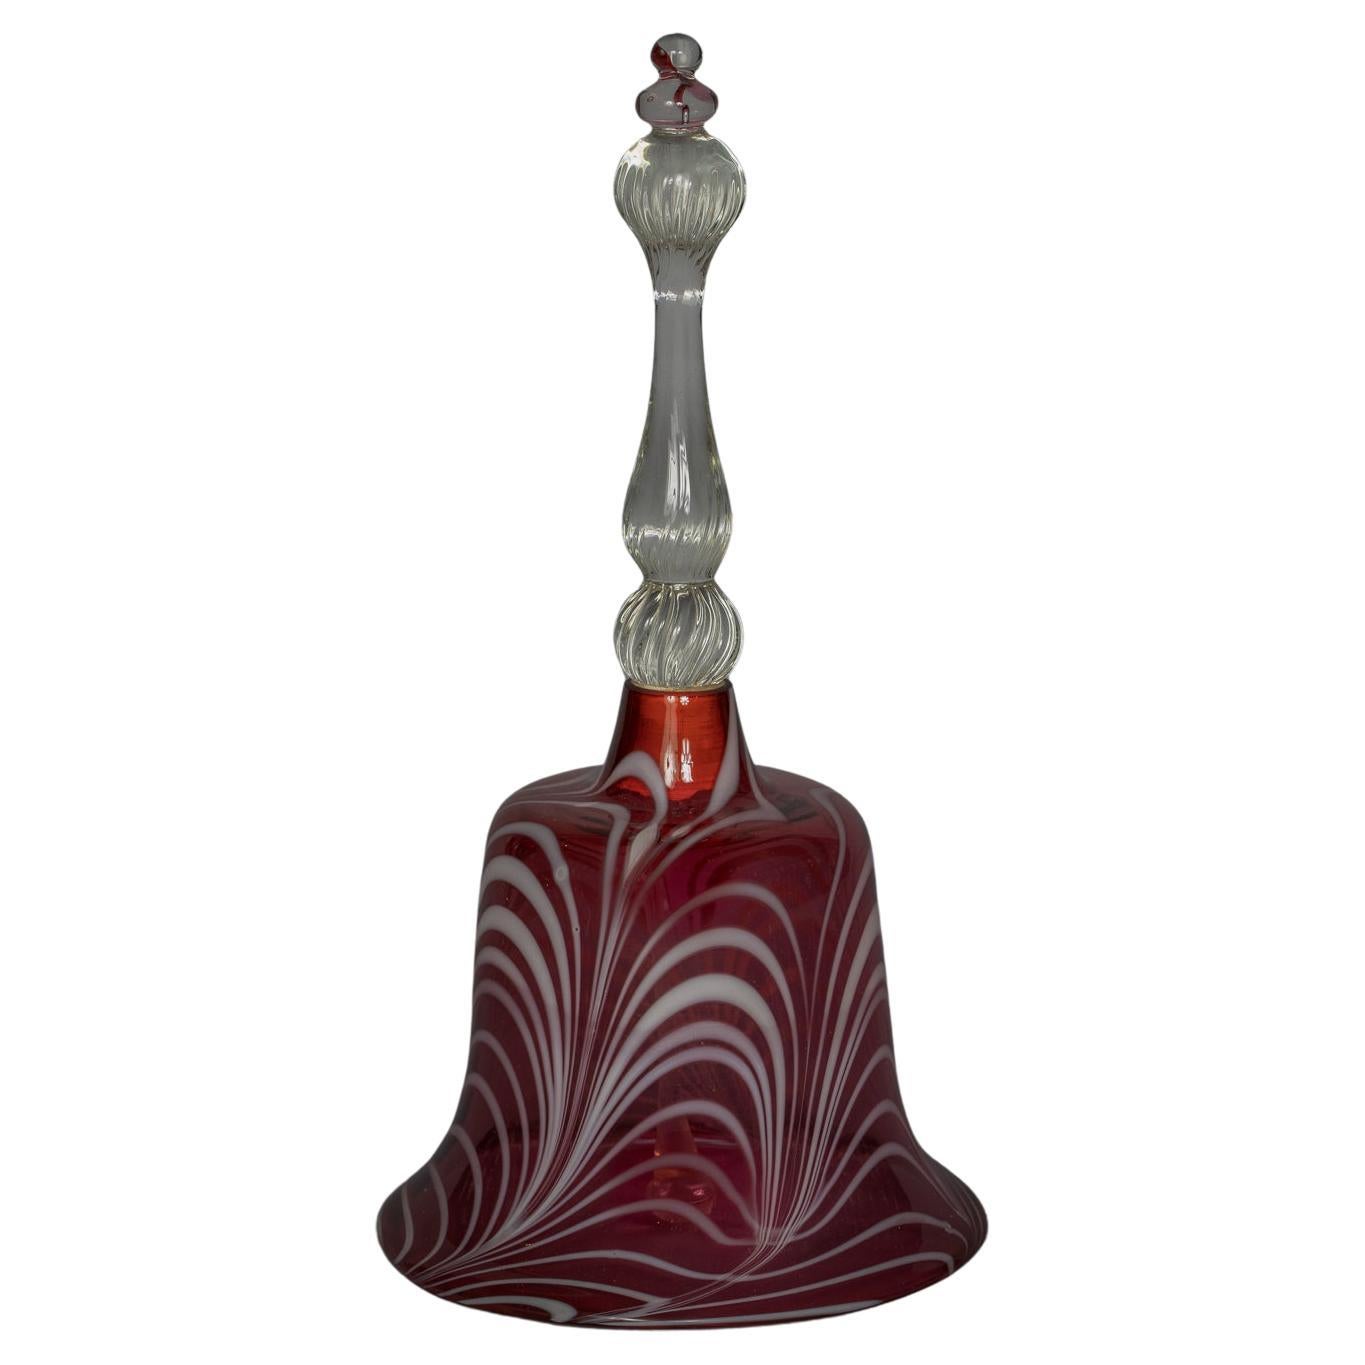 Large Red and White Glass Hand Bell, circa 1880